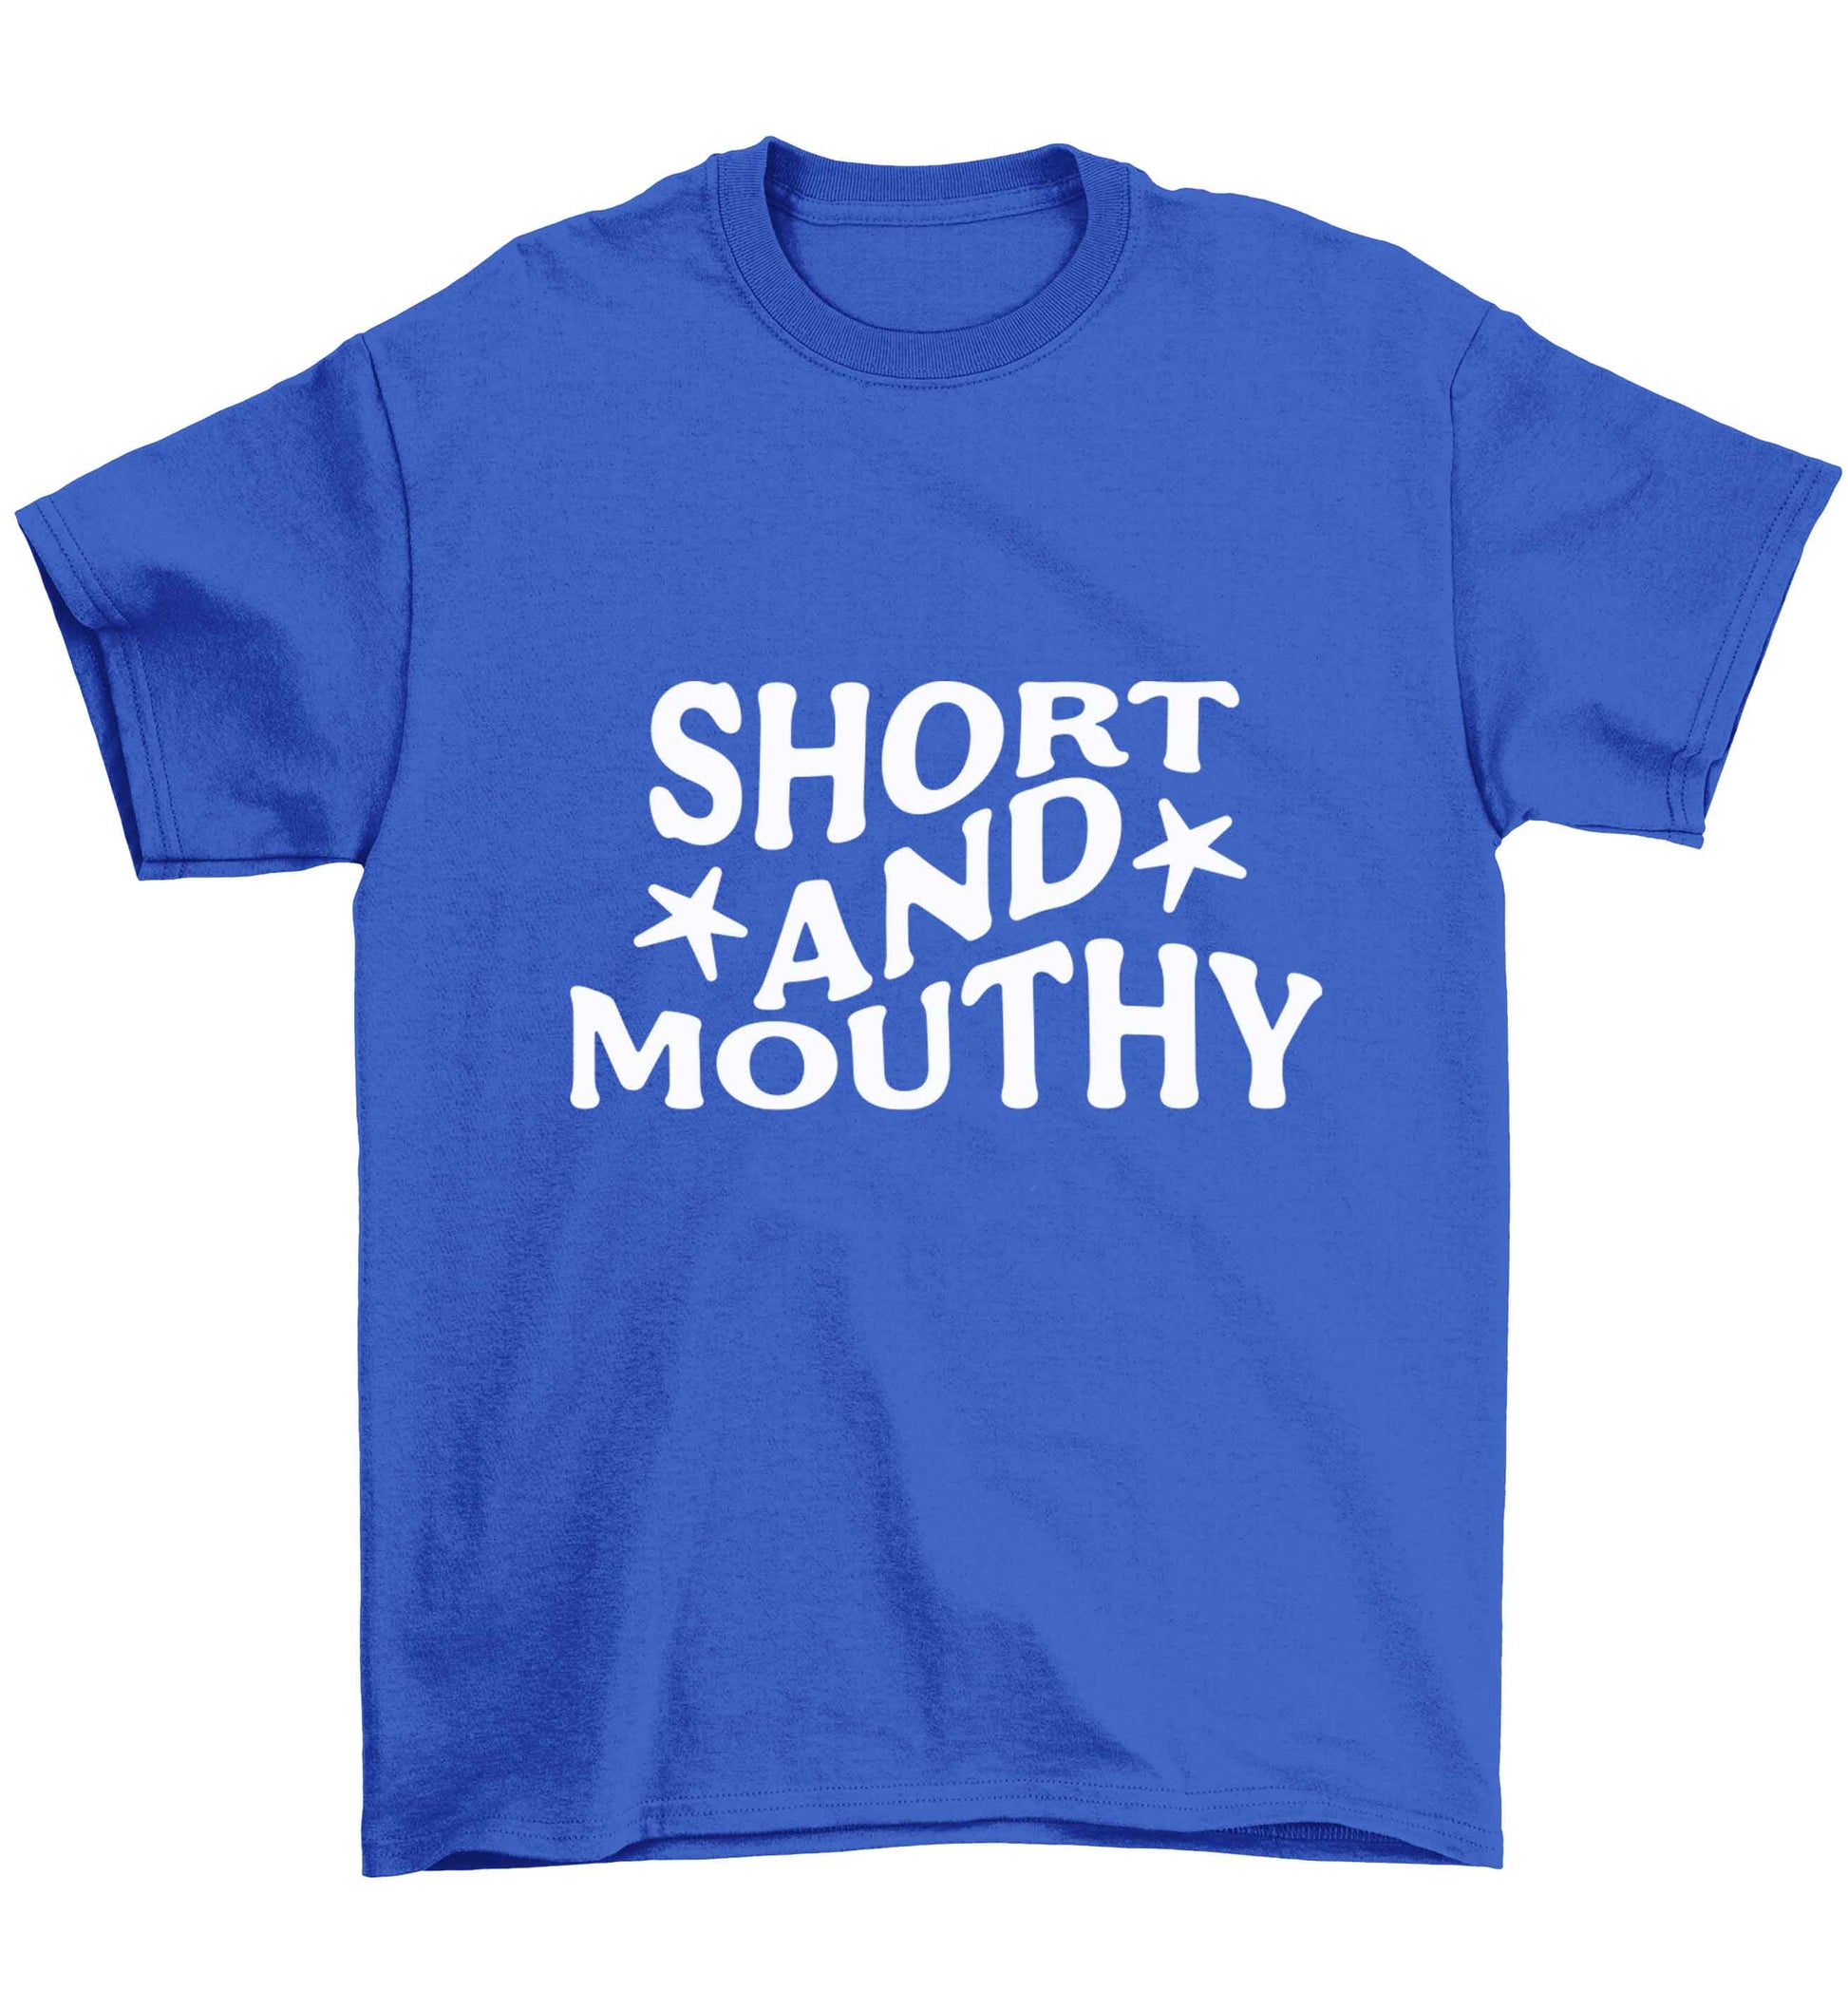 Short and mouthy Children's blue Tshirt 12-13 Years